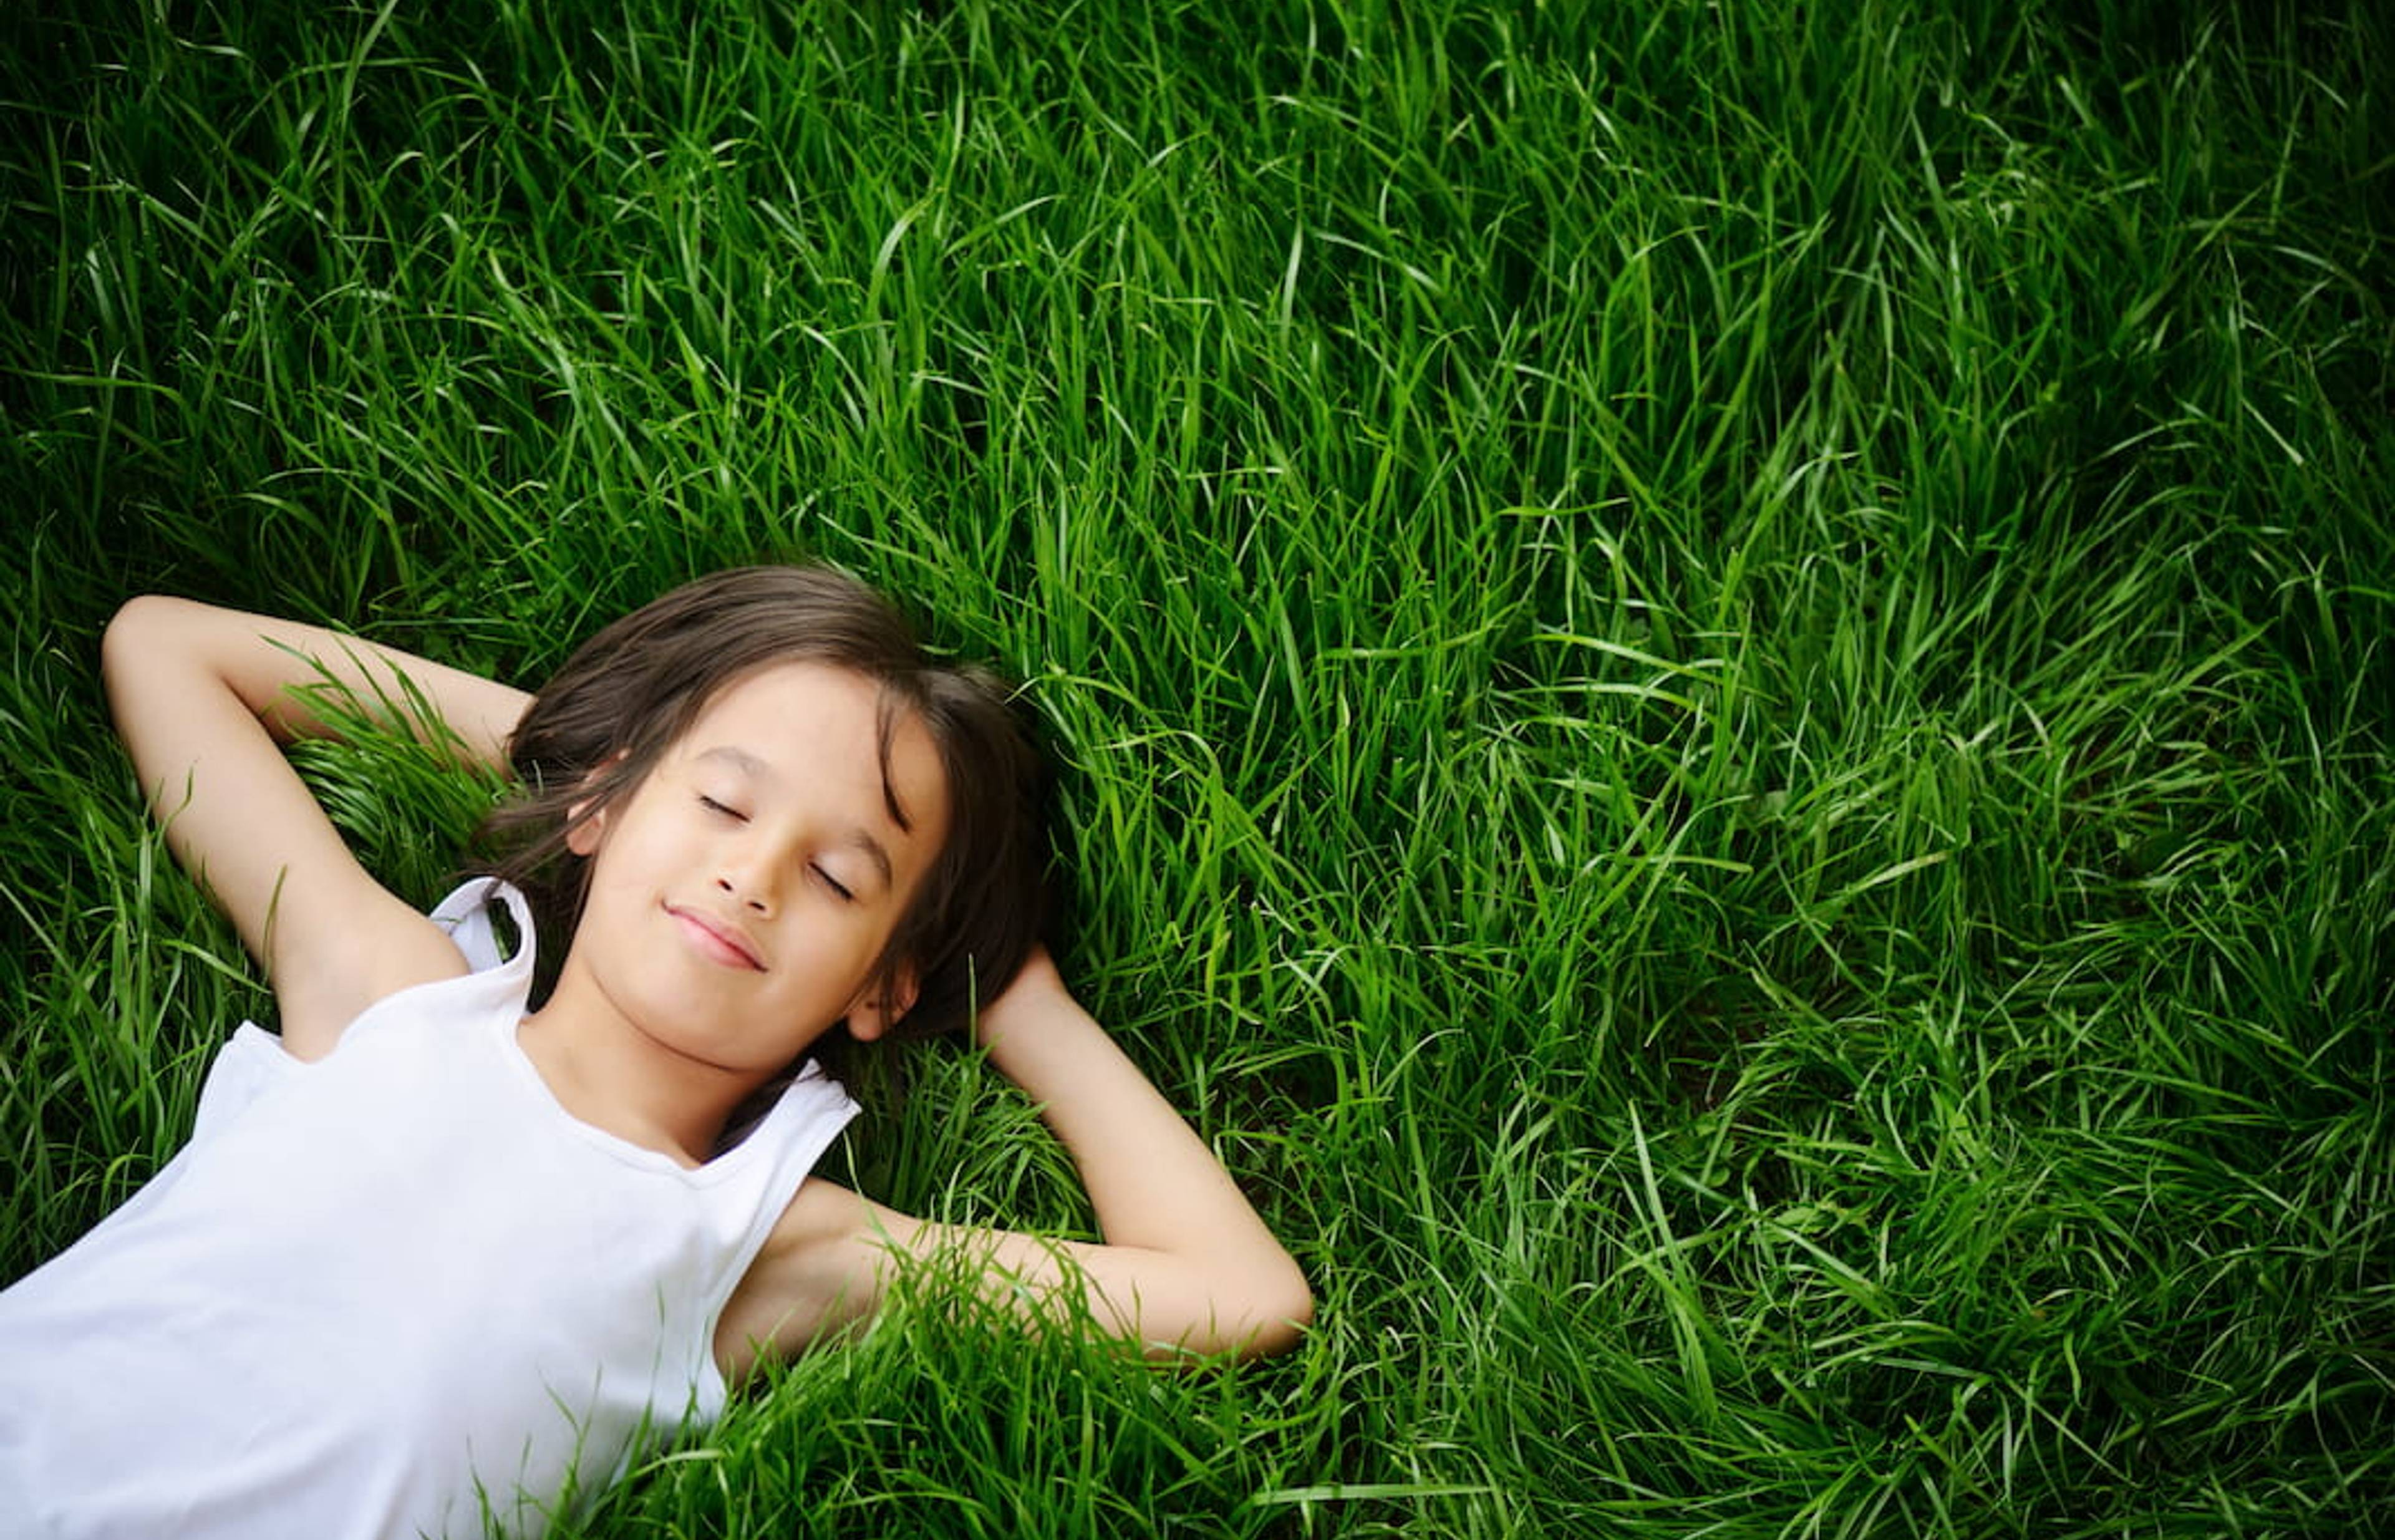 Tips for Relaxation (Video for Primary-Aged Children)